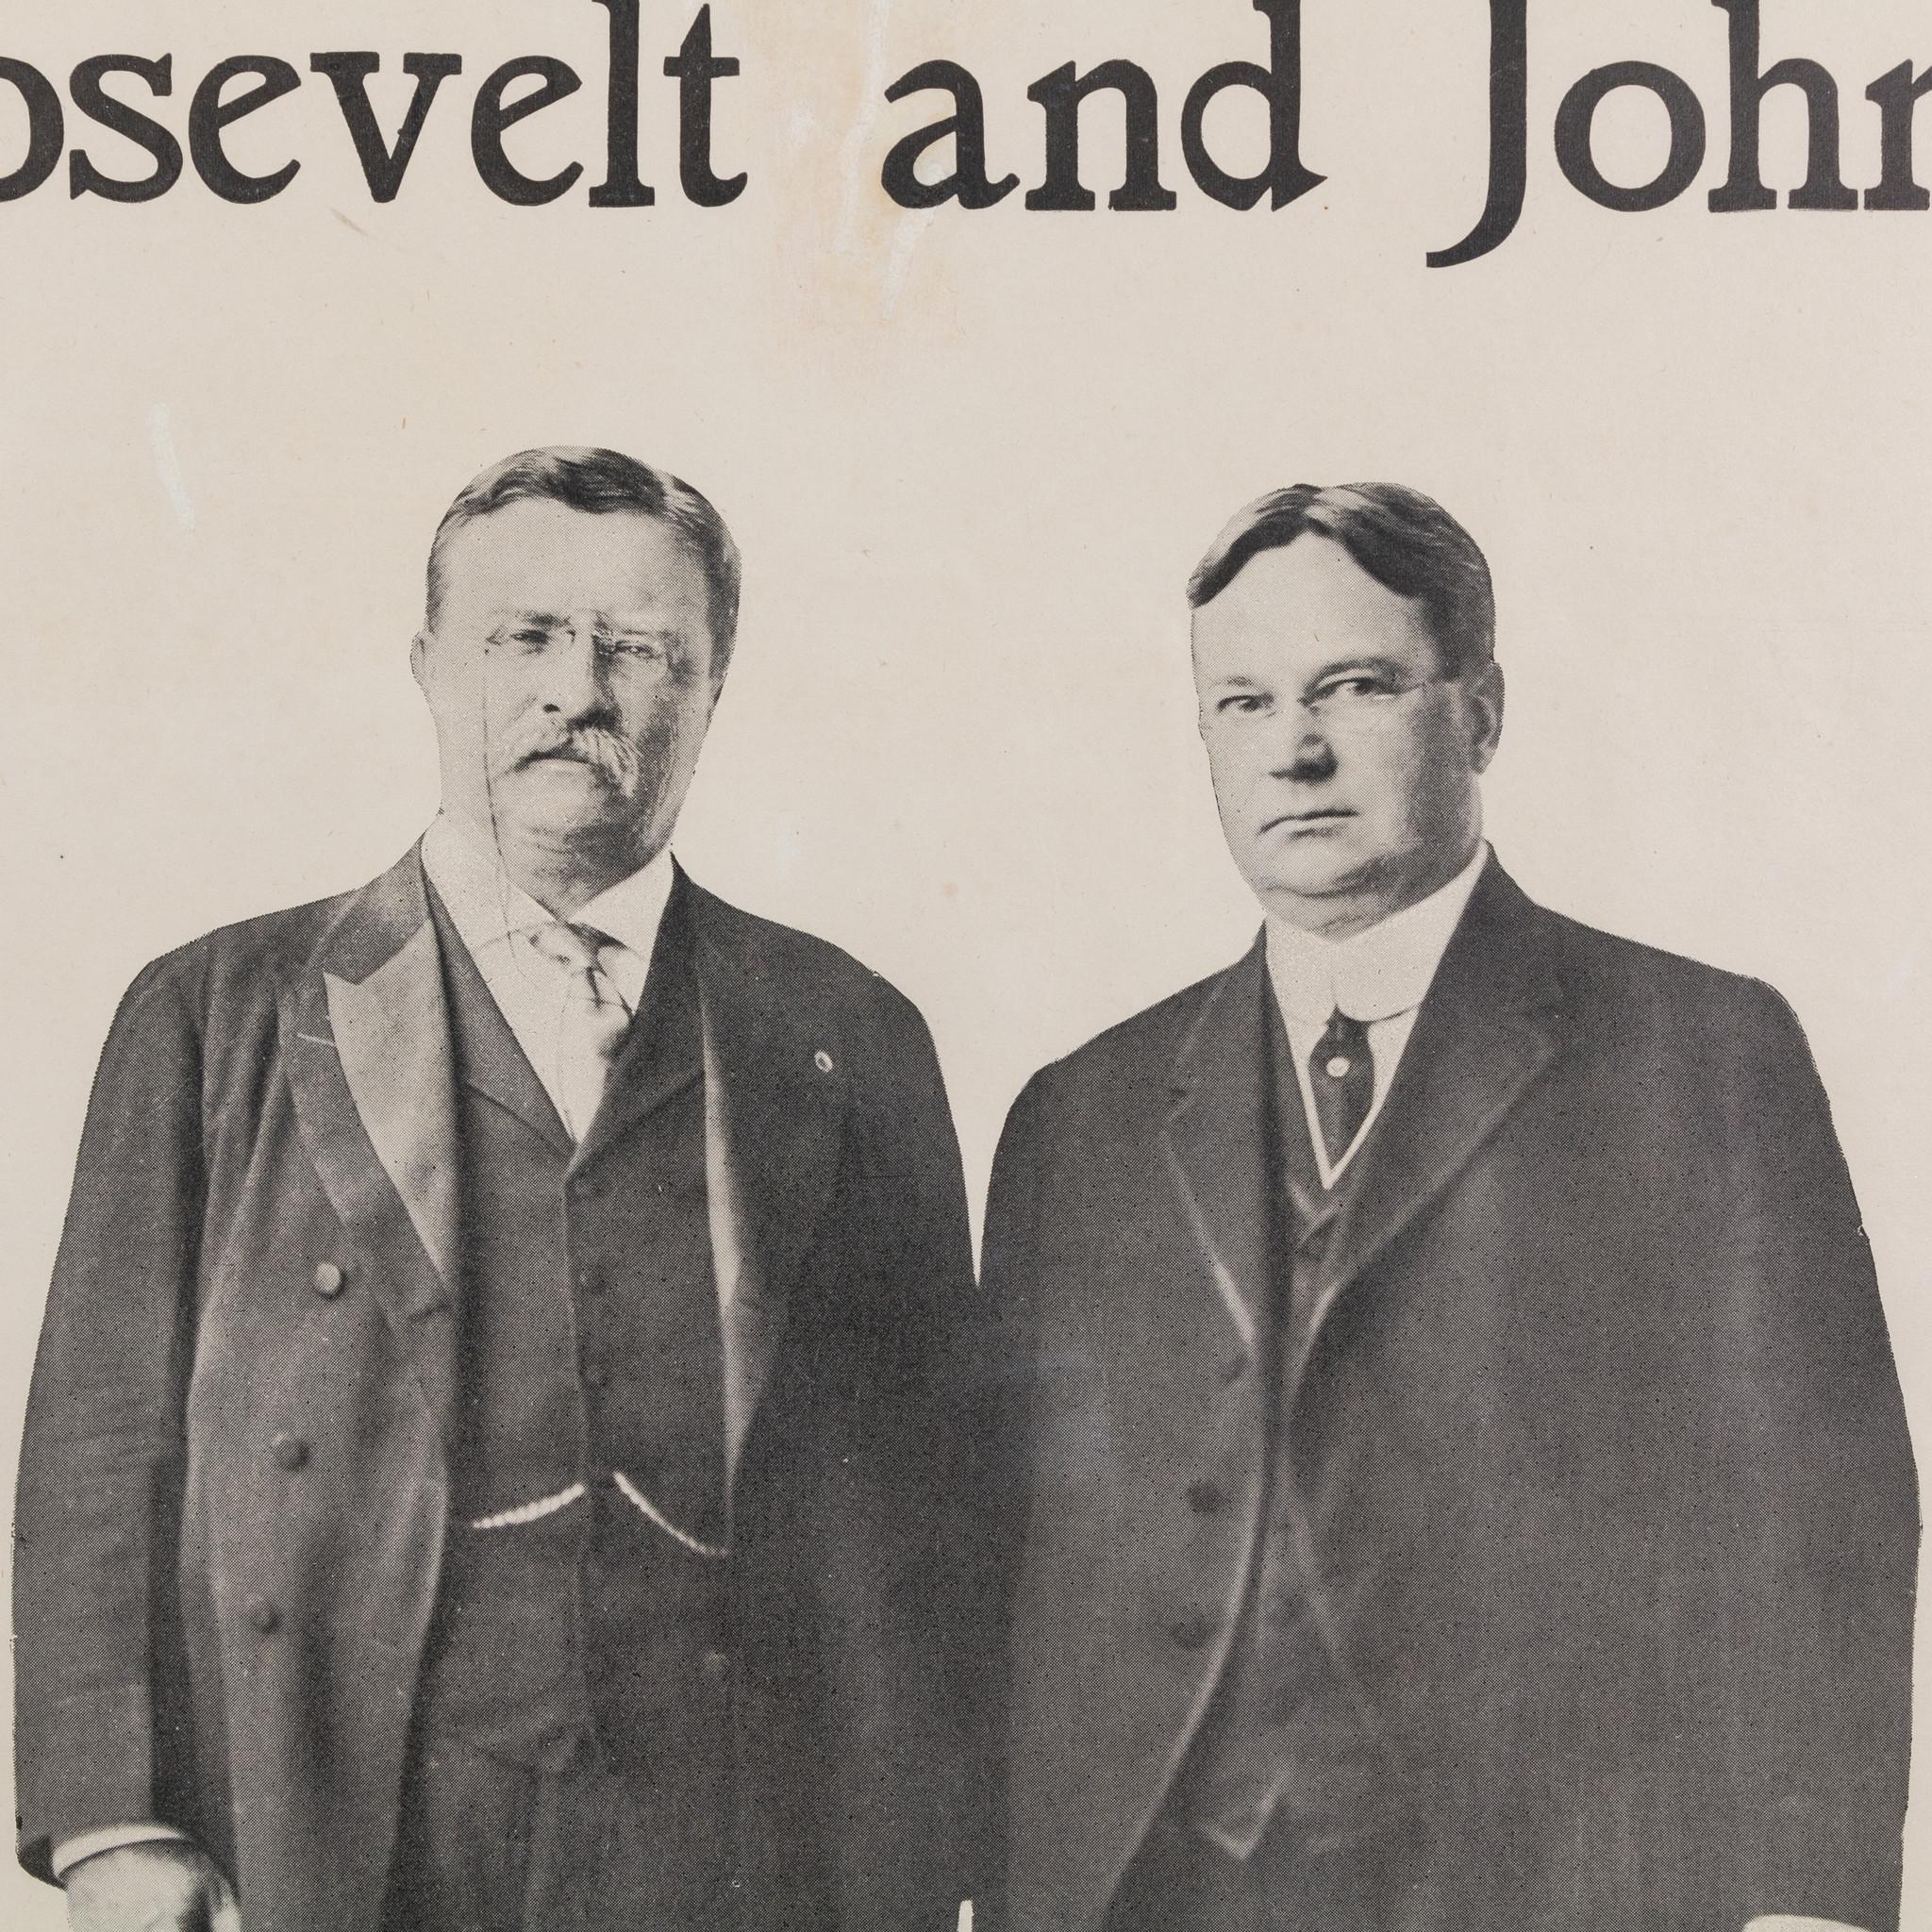 theodore roosevelt campaign poster